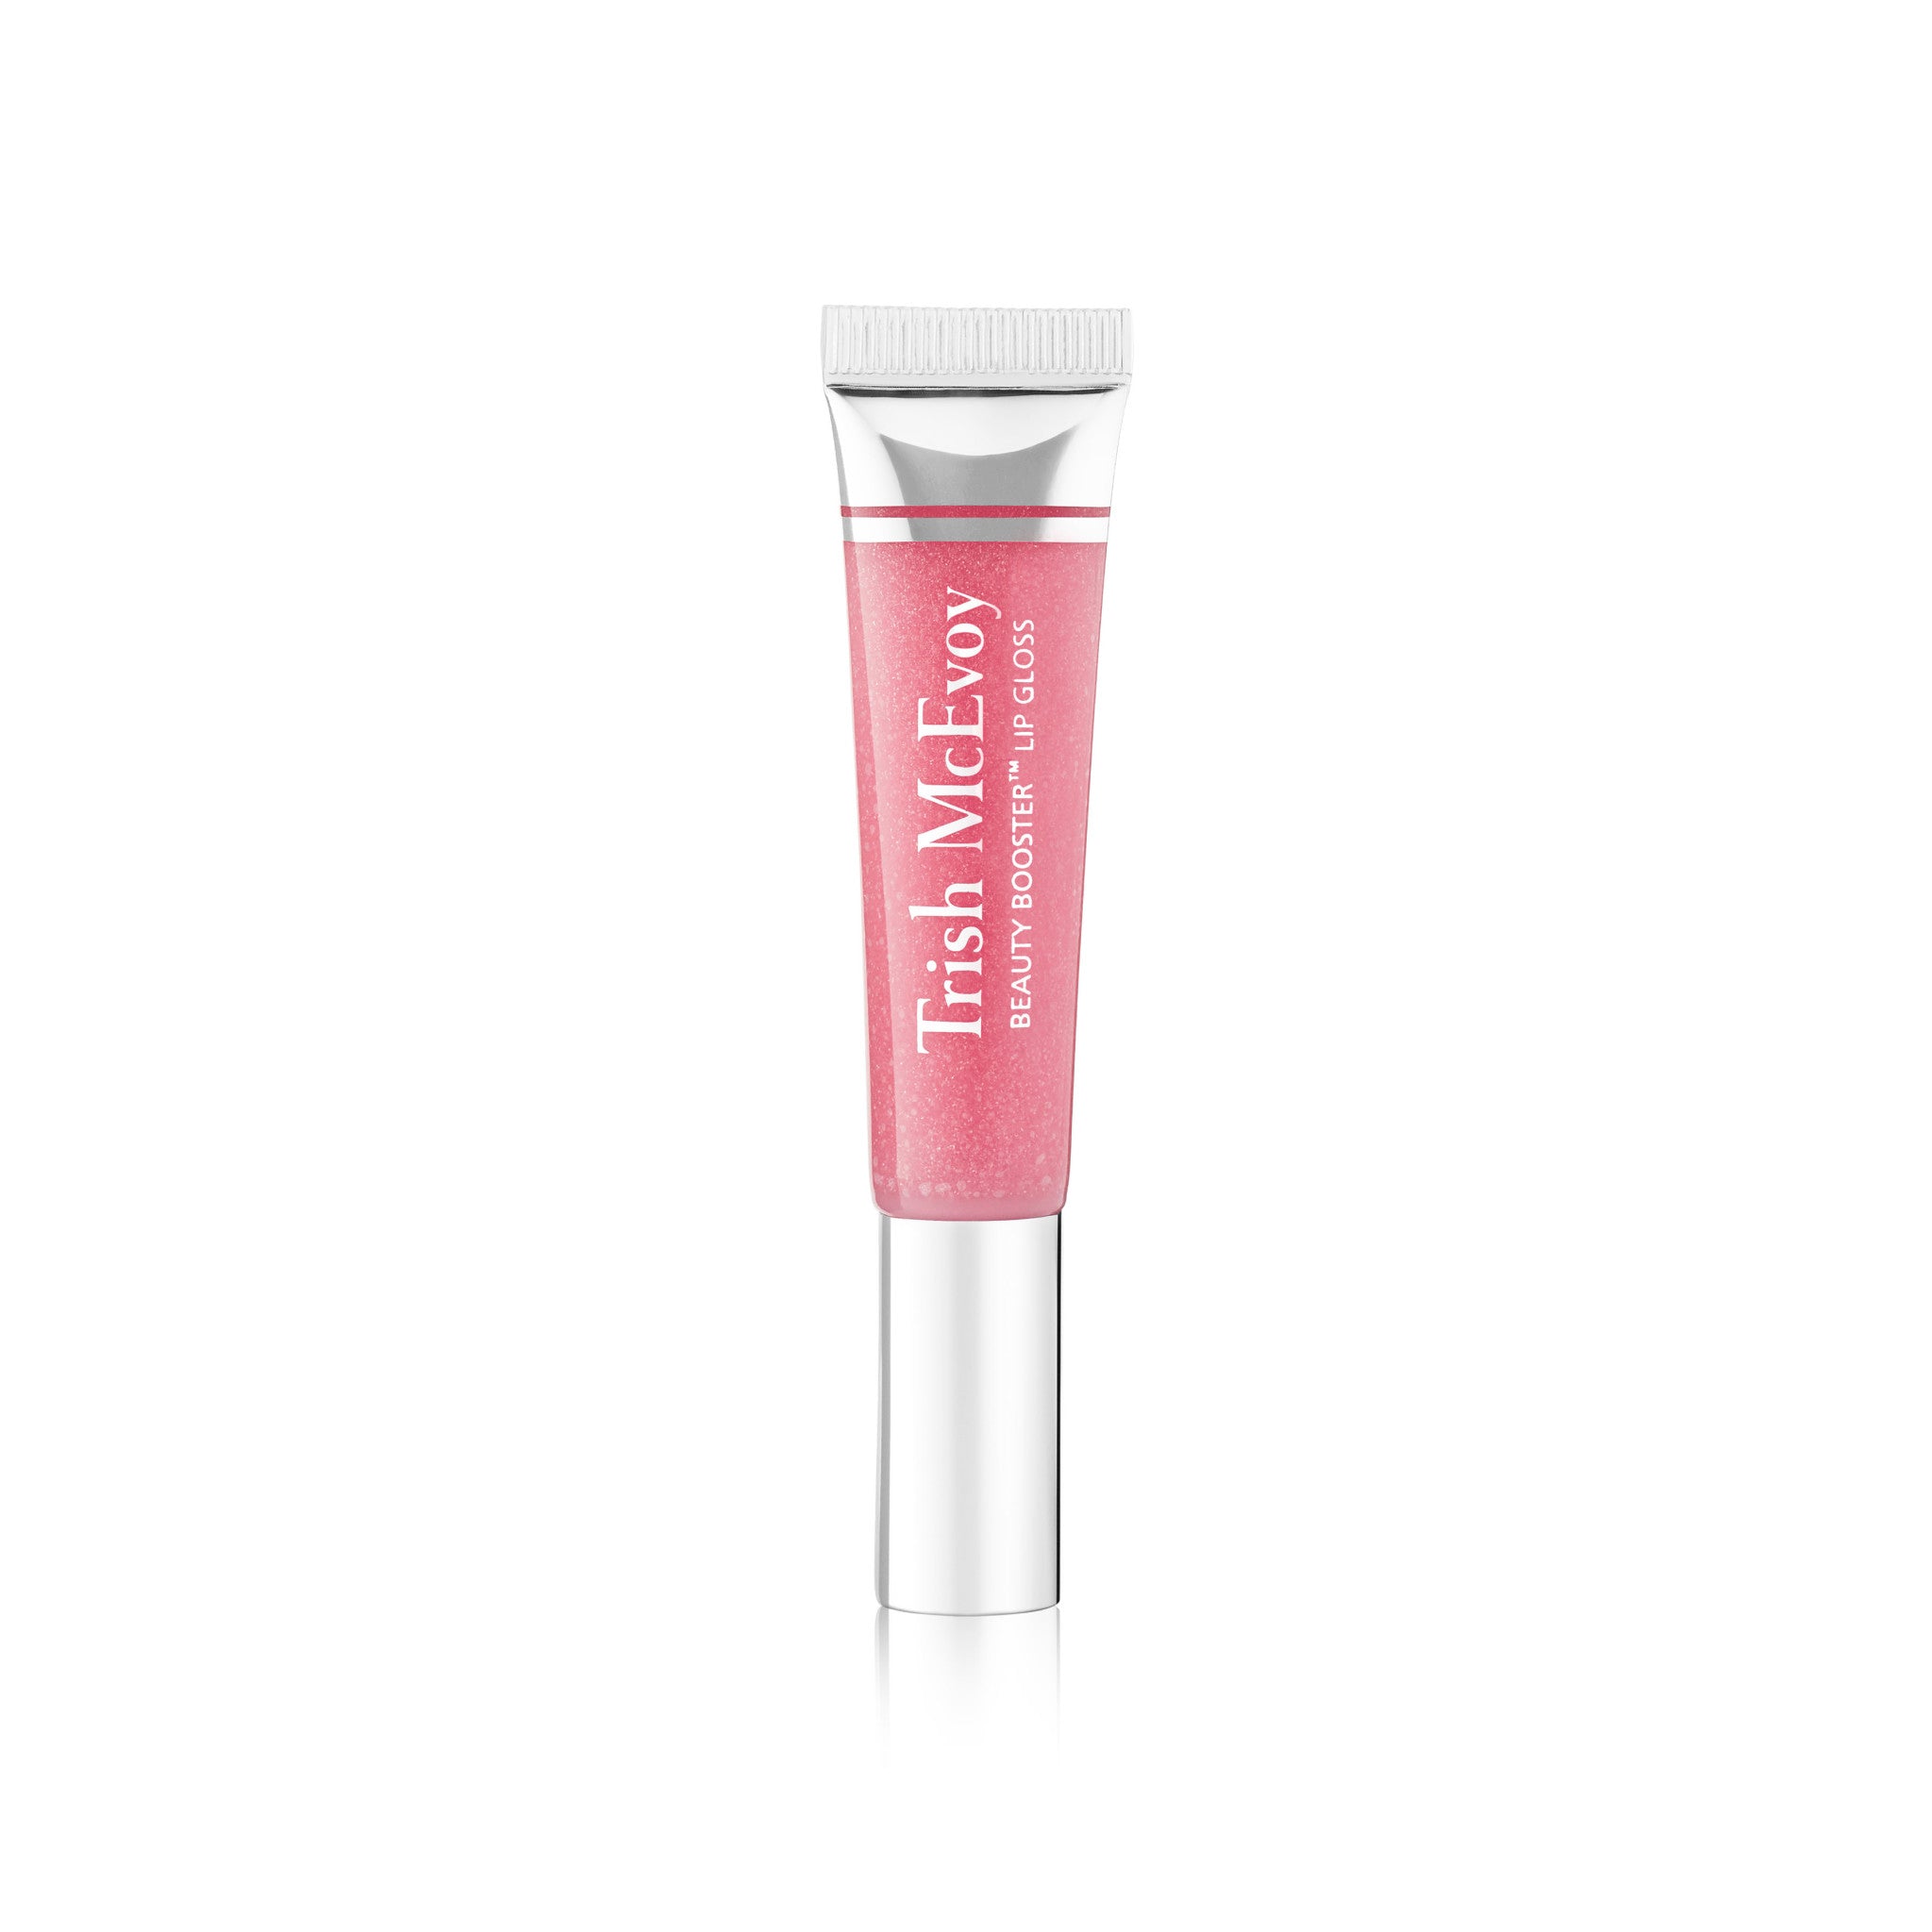 Trish McEvoy Beauty Booster Lip Gloss Color/Shade variant: Sexy Petal main image. This product is in the color pink